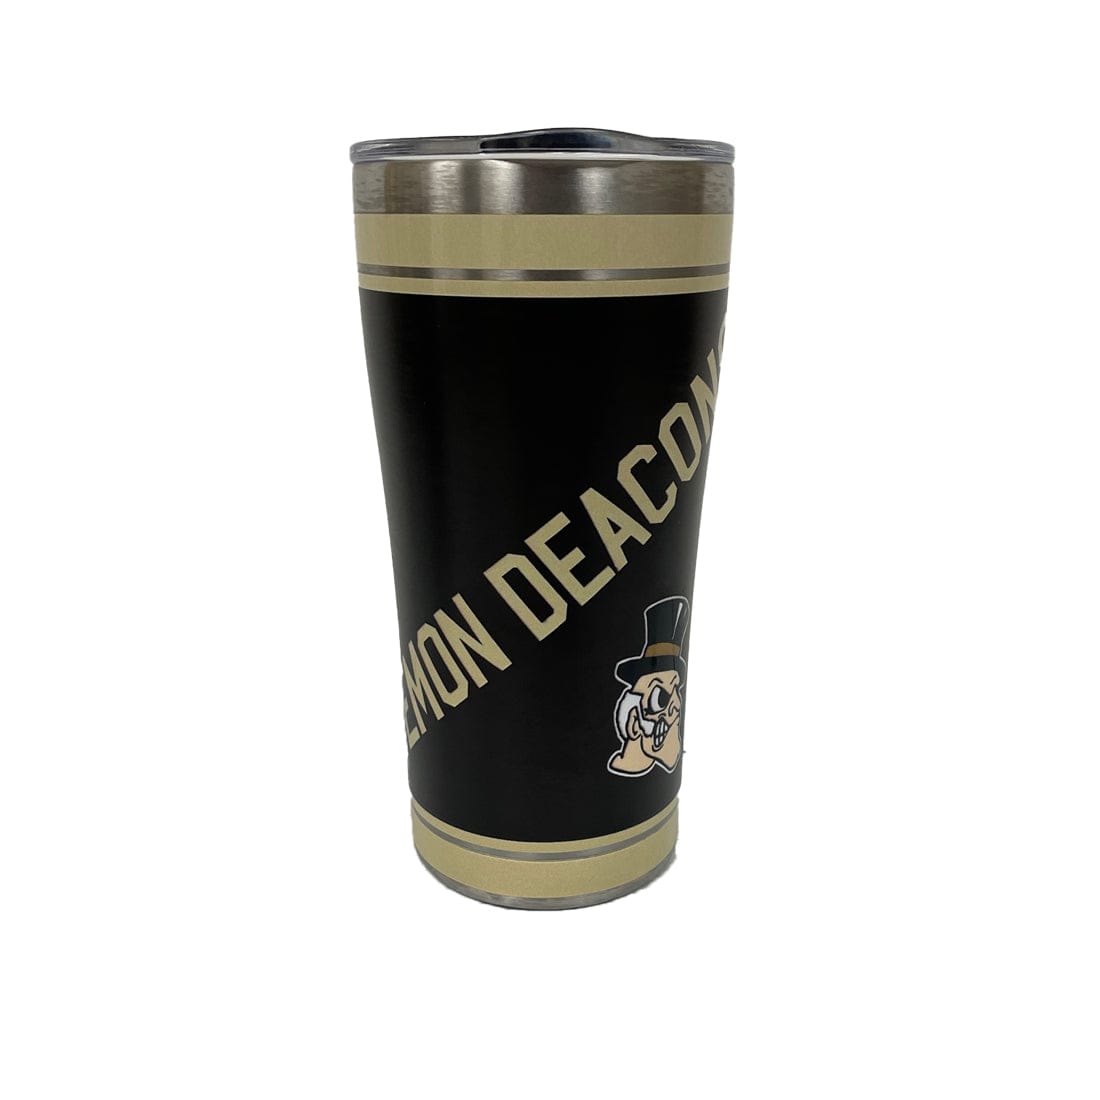 https://cdn.shopify.com/s/files/1/0472/3146/7683/products/tervis-stainless-steel-20-oz-wake-forest-campus-tumbler-with-slider-lid-36239398043811_1600x.jpg?v=1669990412